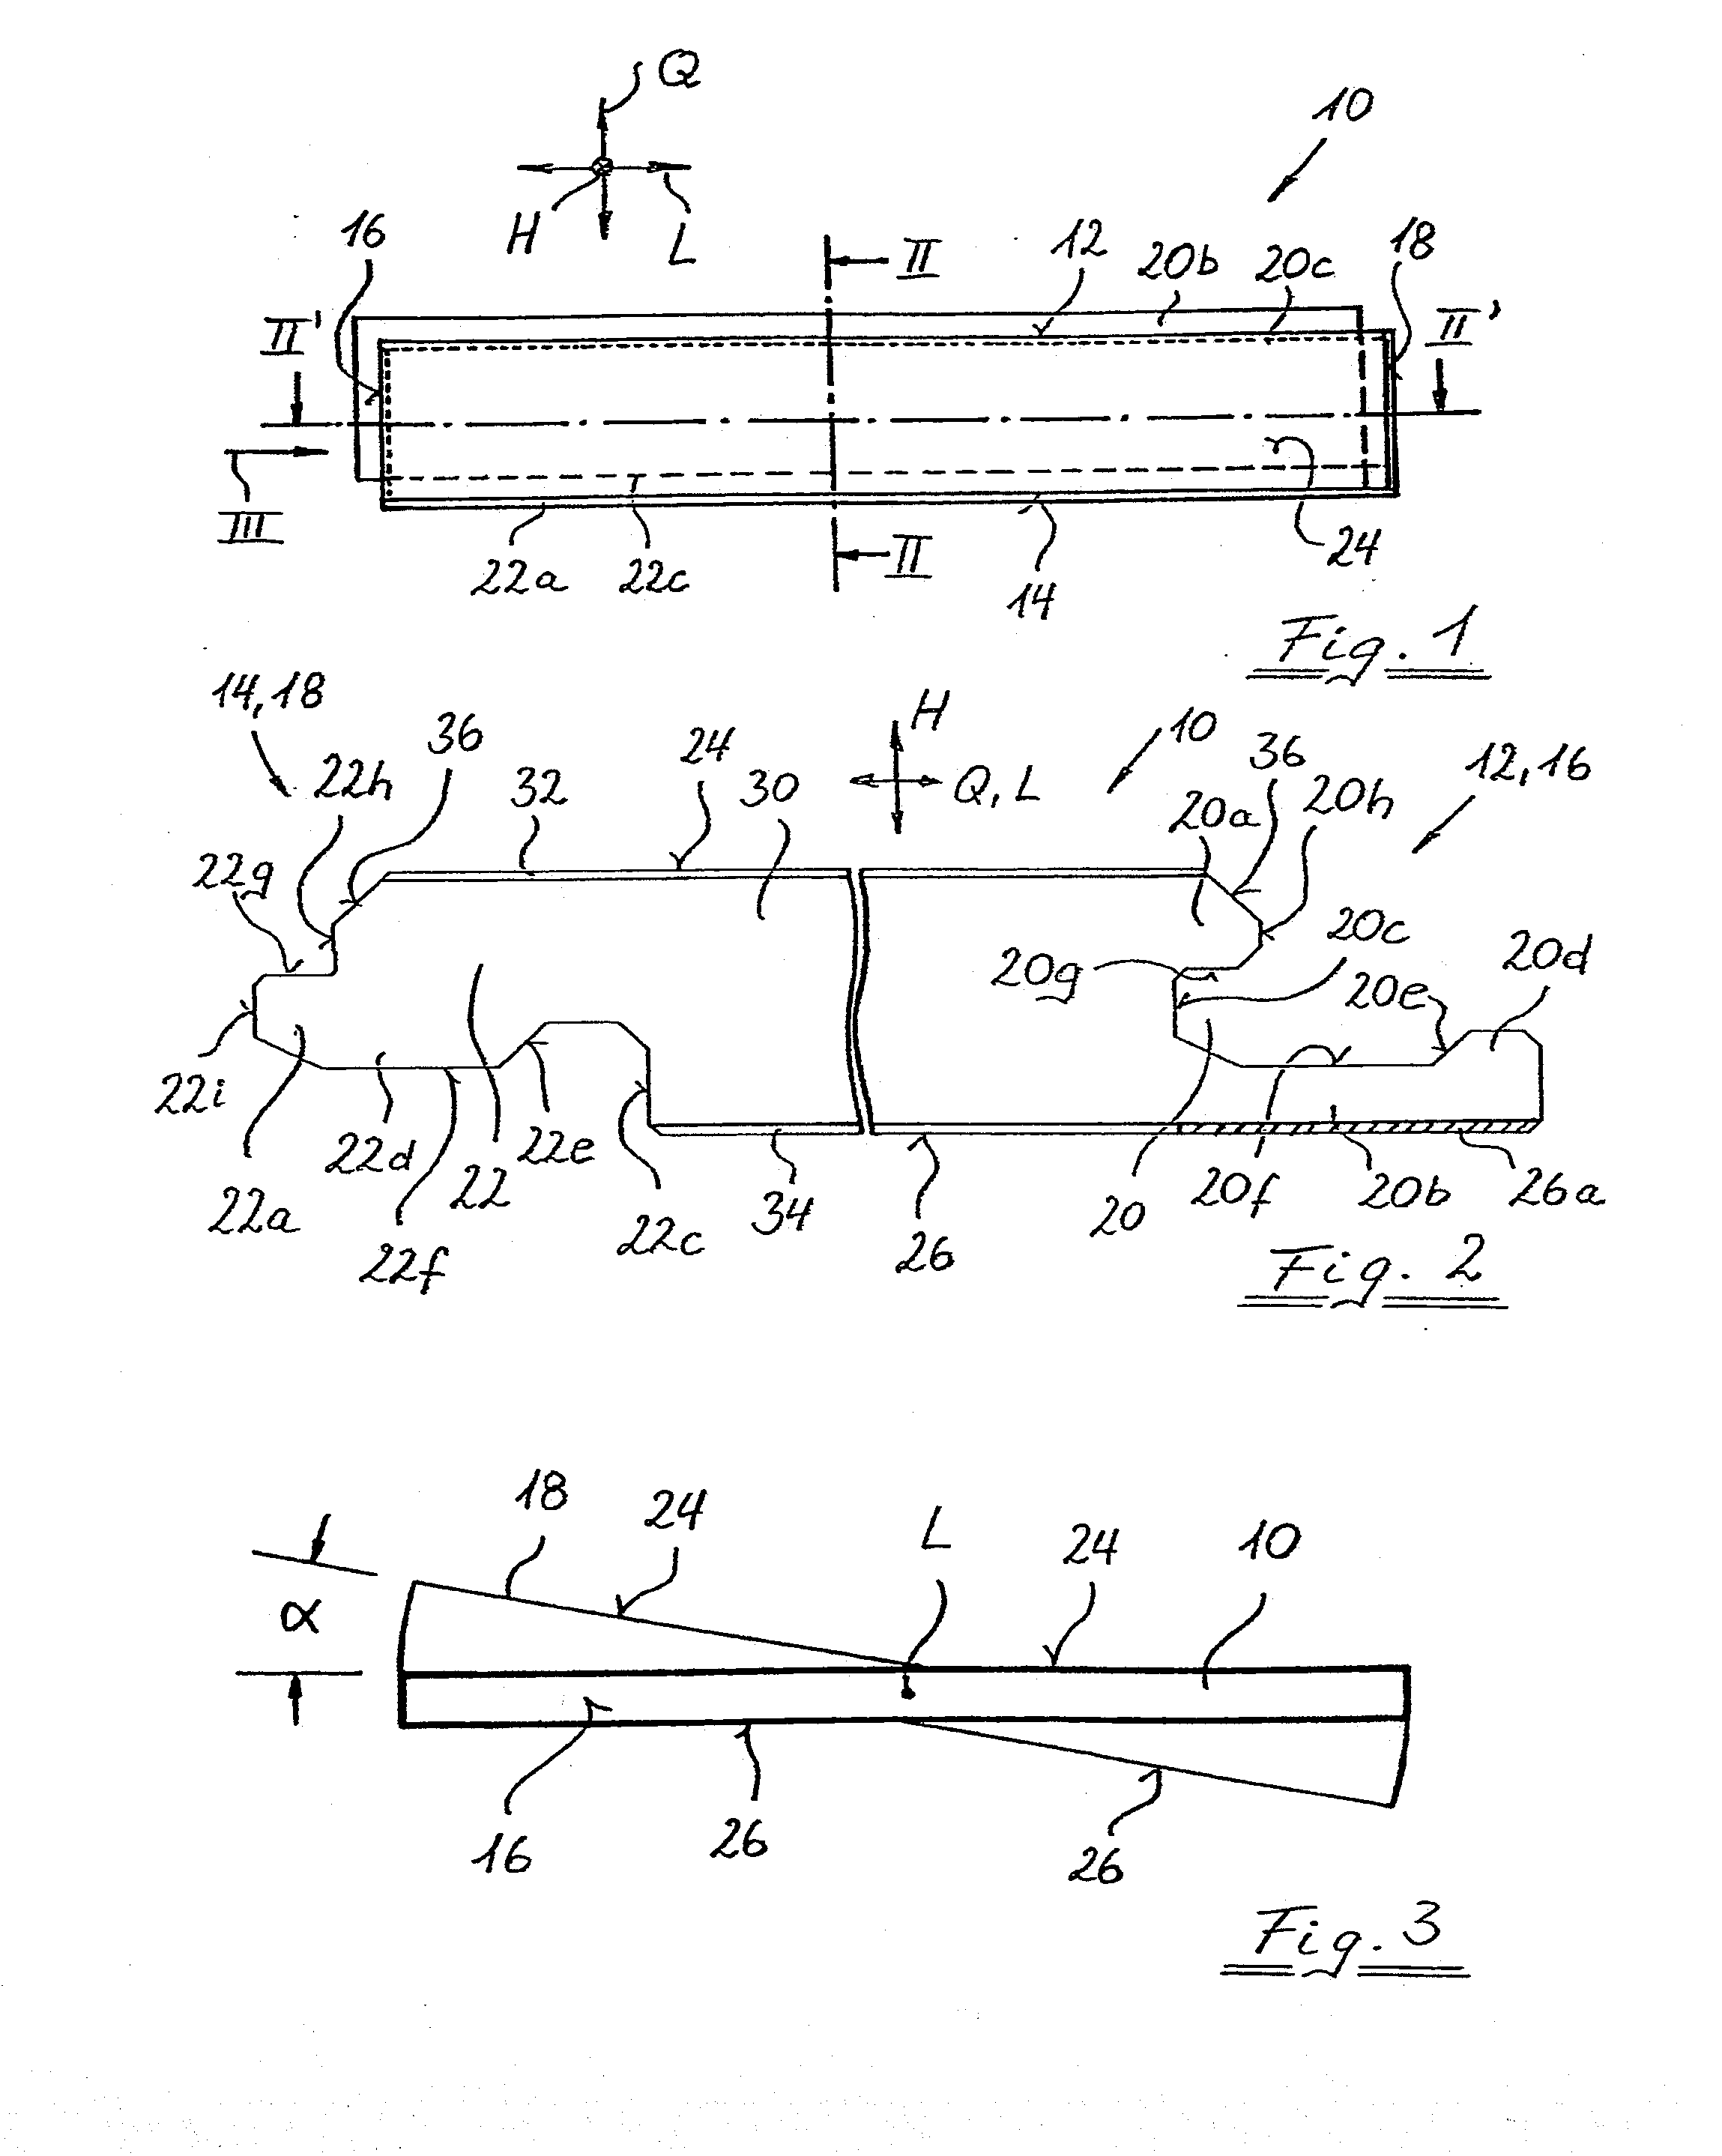 Method for Placing and Mechanically Connecting Panels